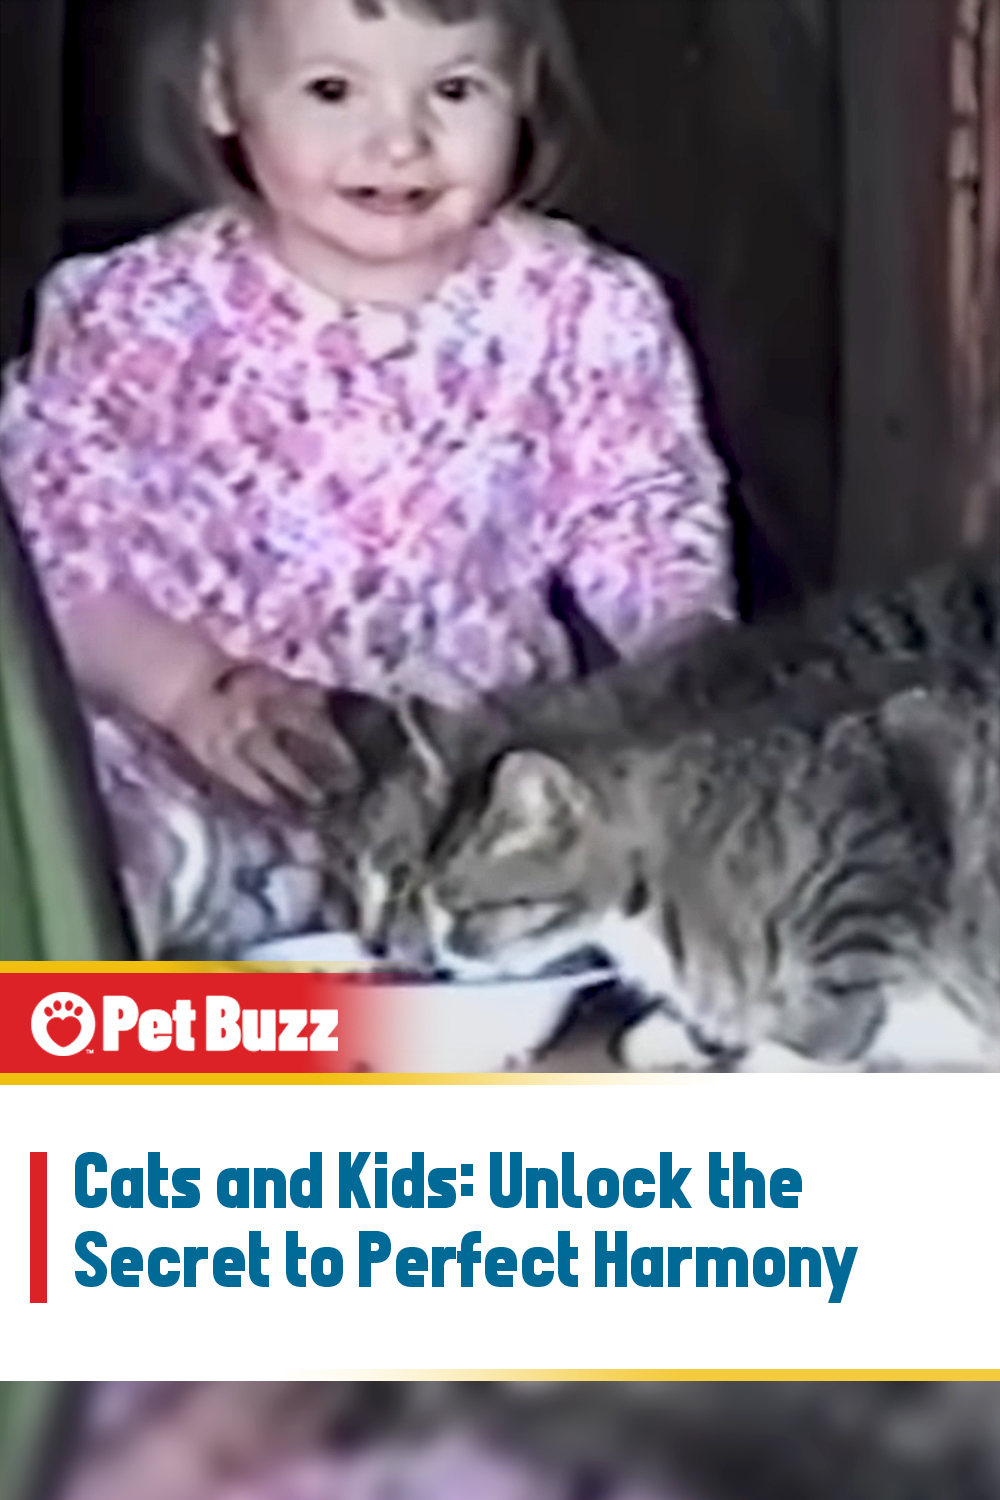 Cats and Kids: Unlock the Secret to Perfect Harmony